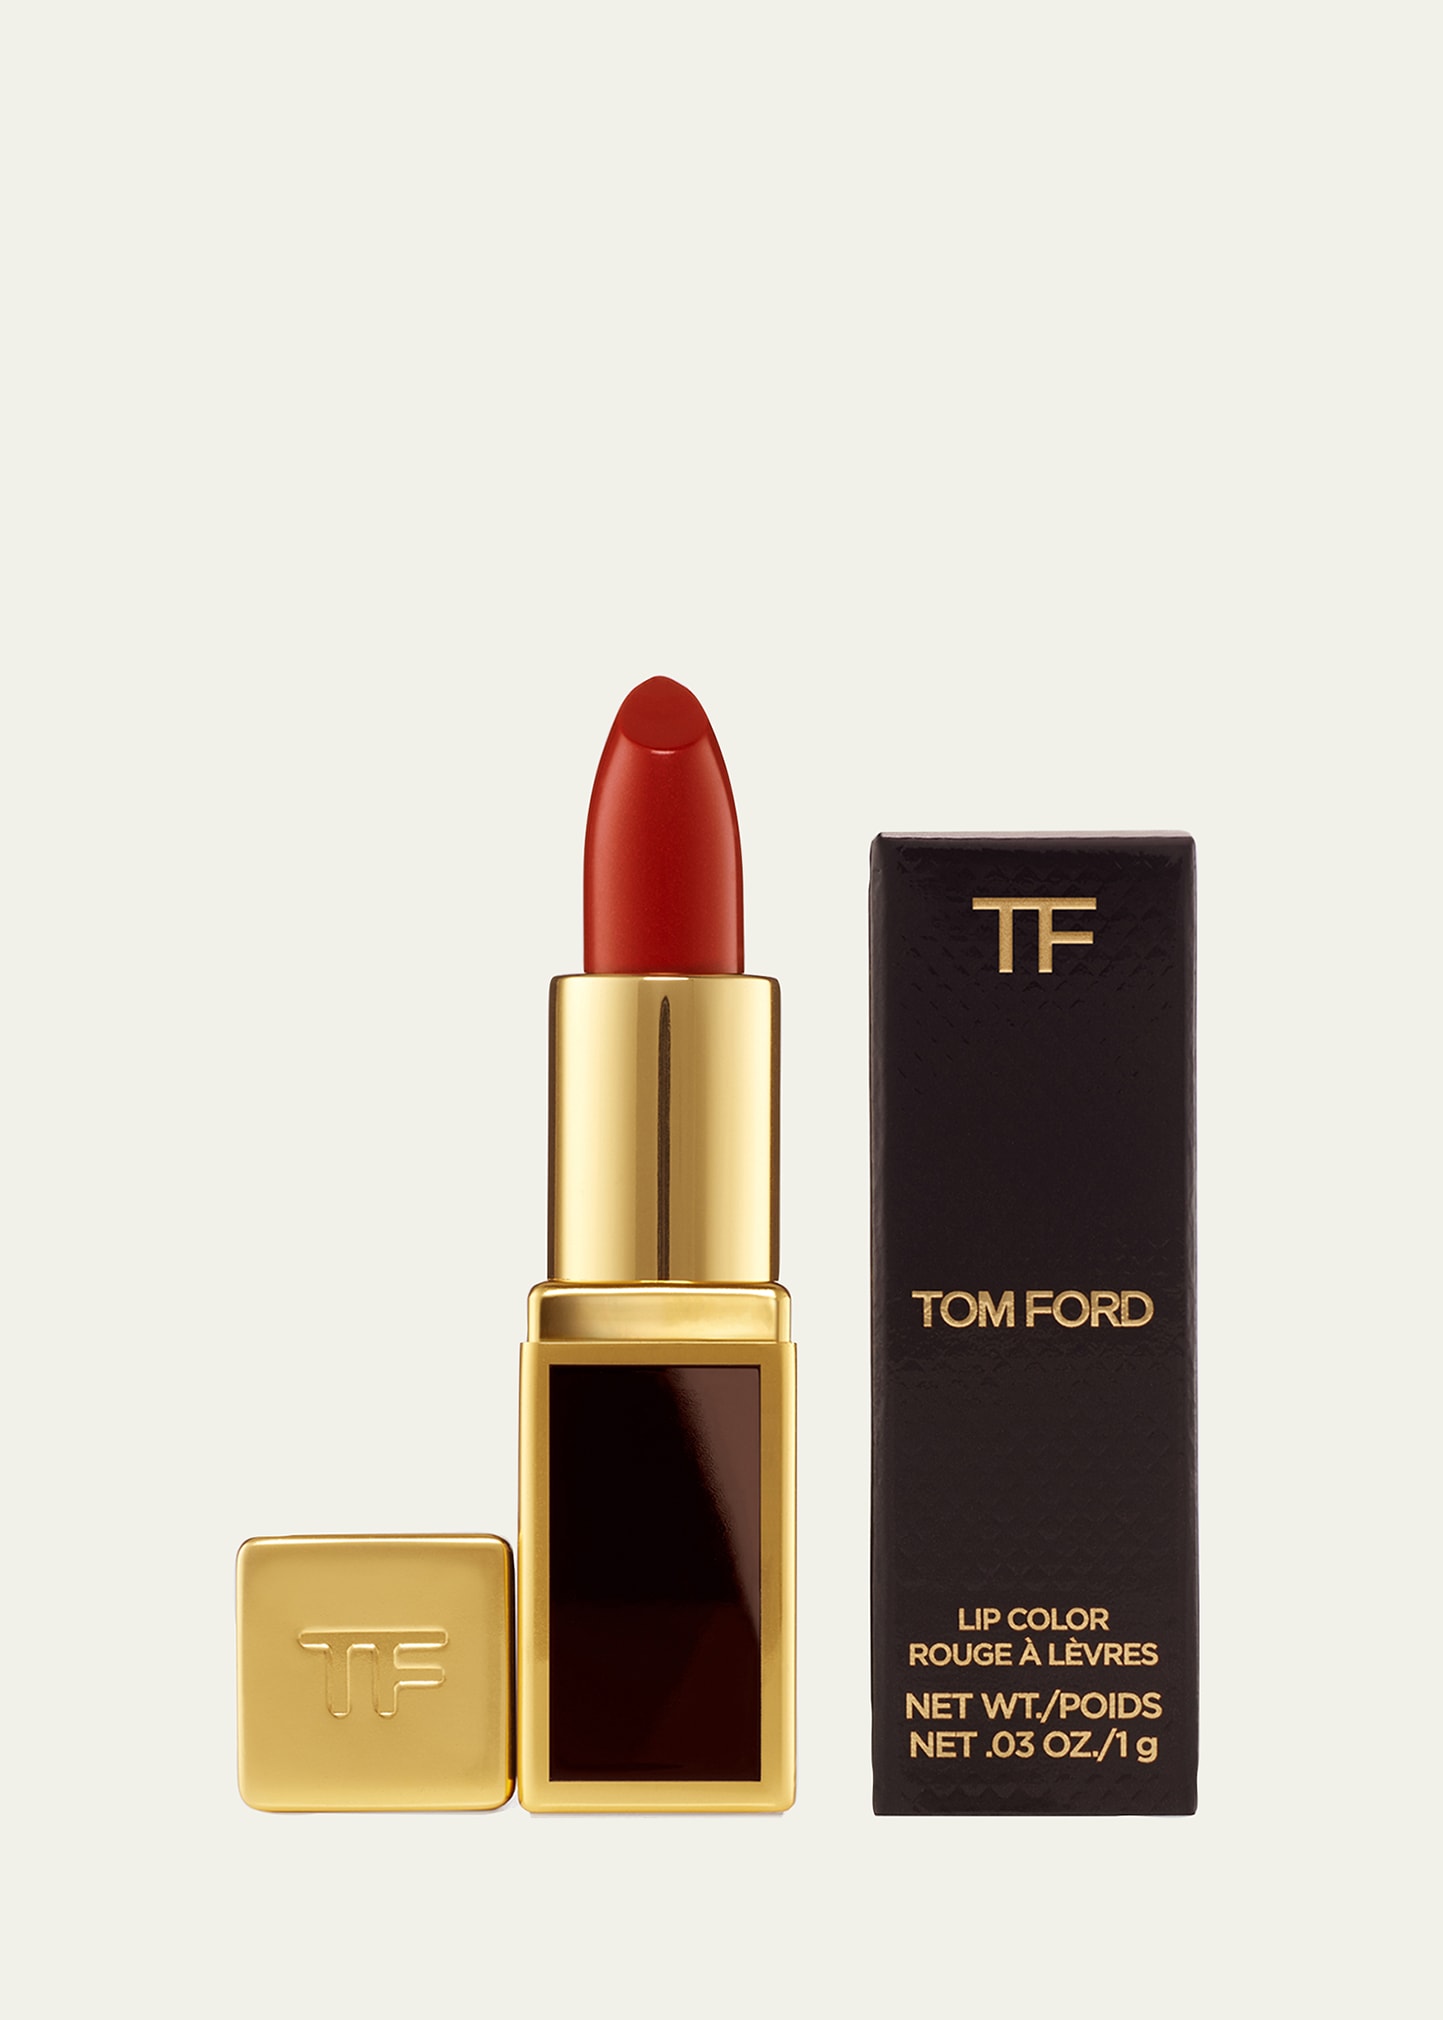 TOM FORD Yours with any Tom Ford Beauty Purchase - Bergdorf Goodman